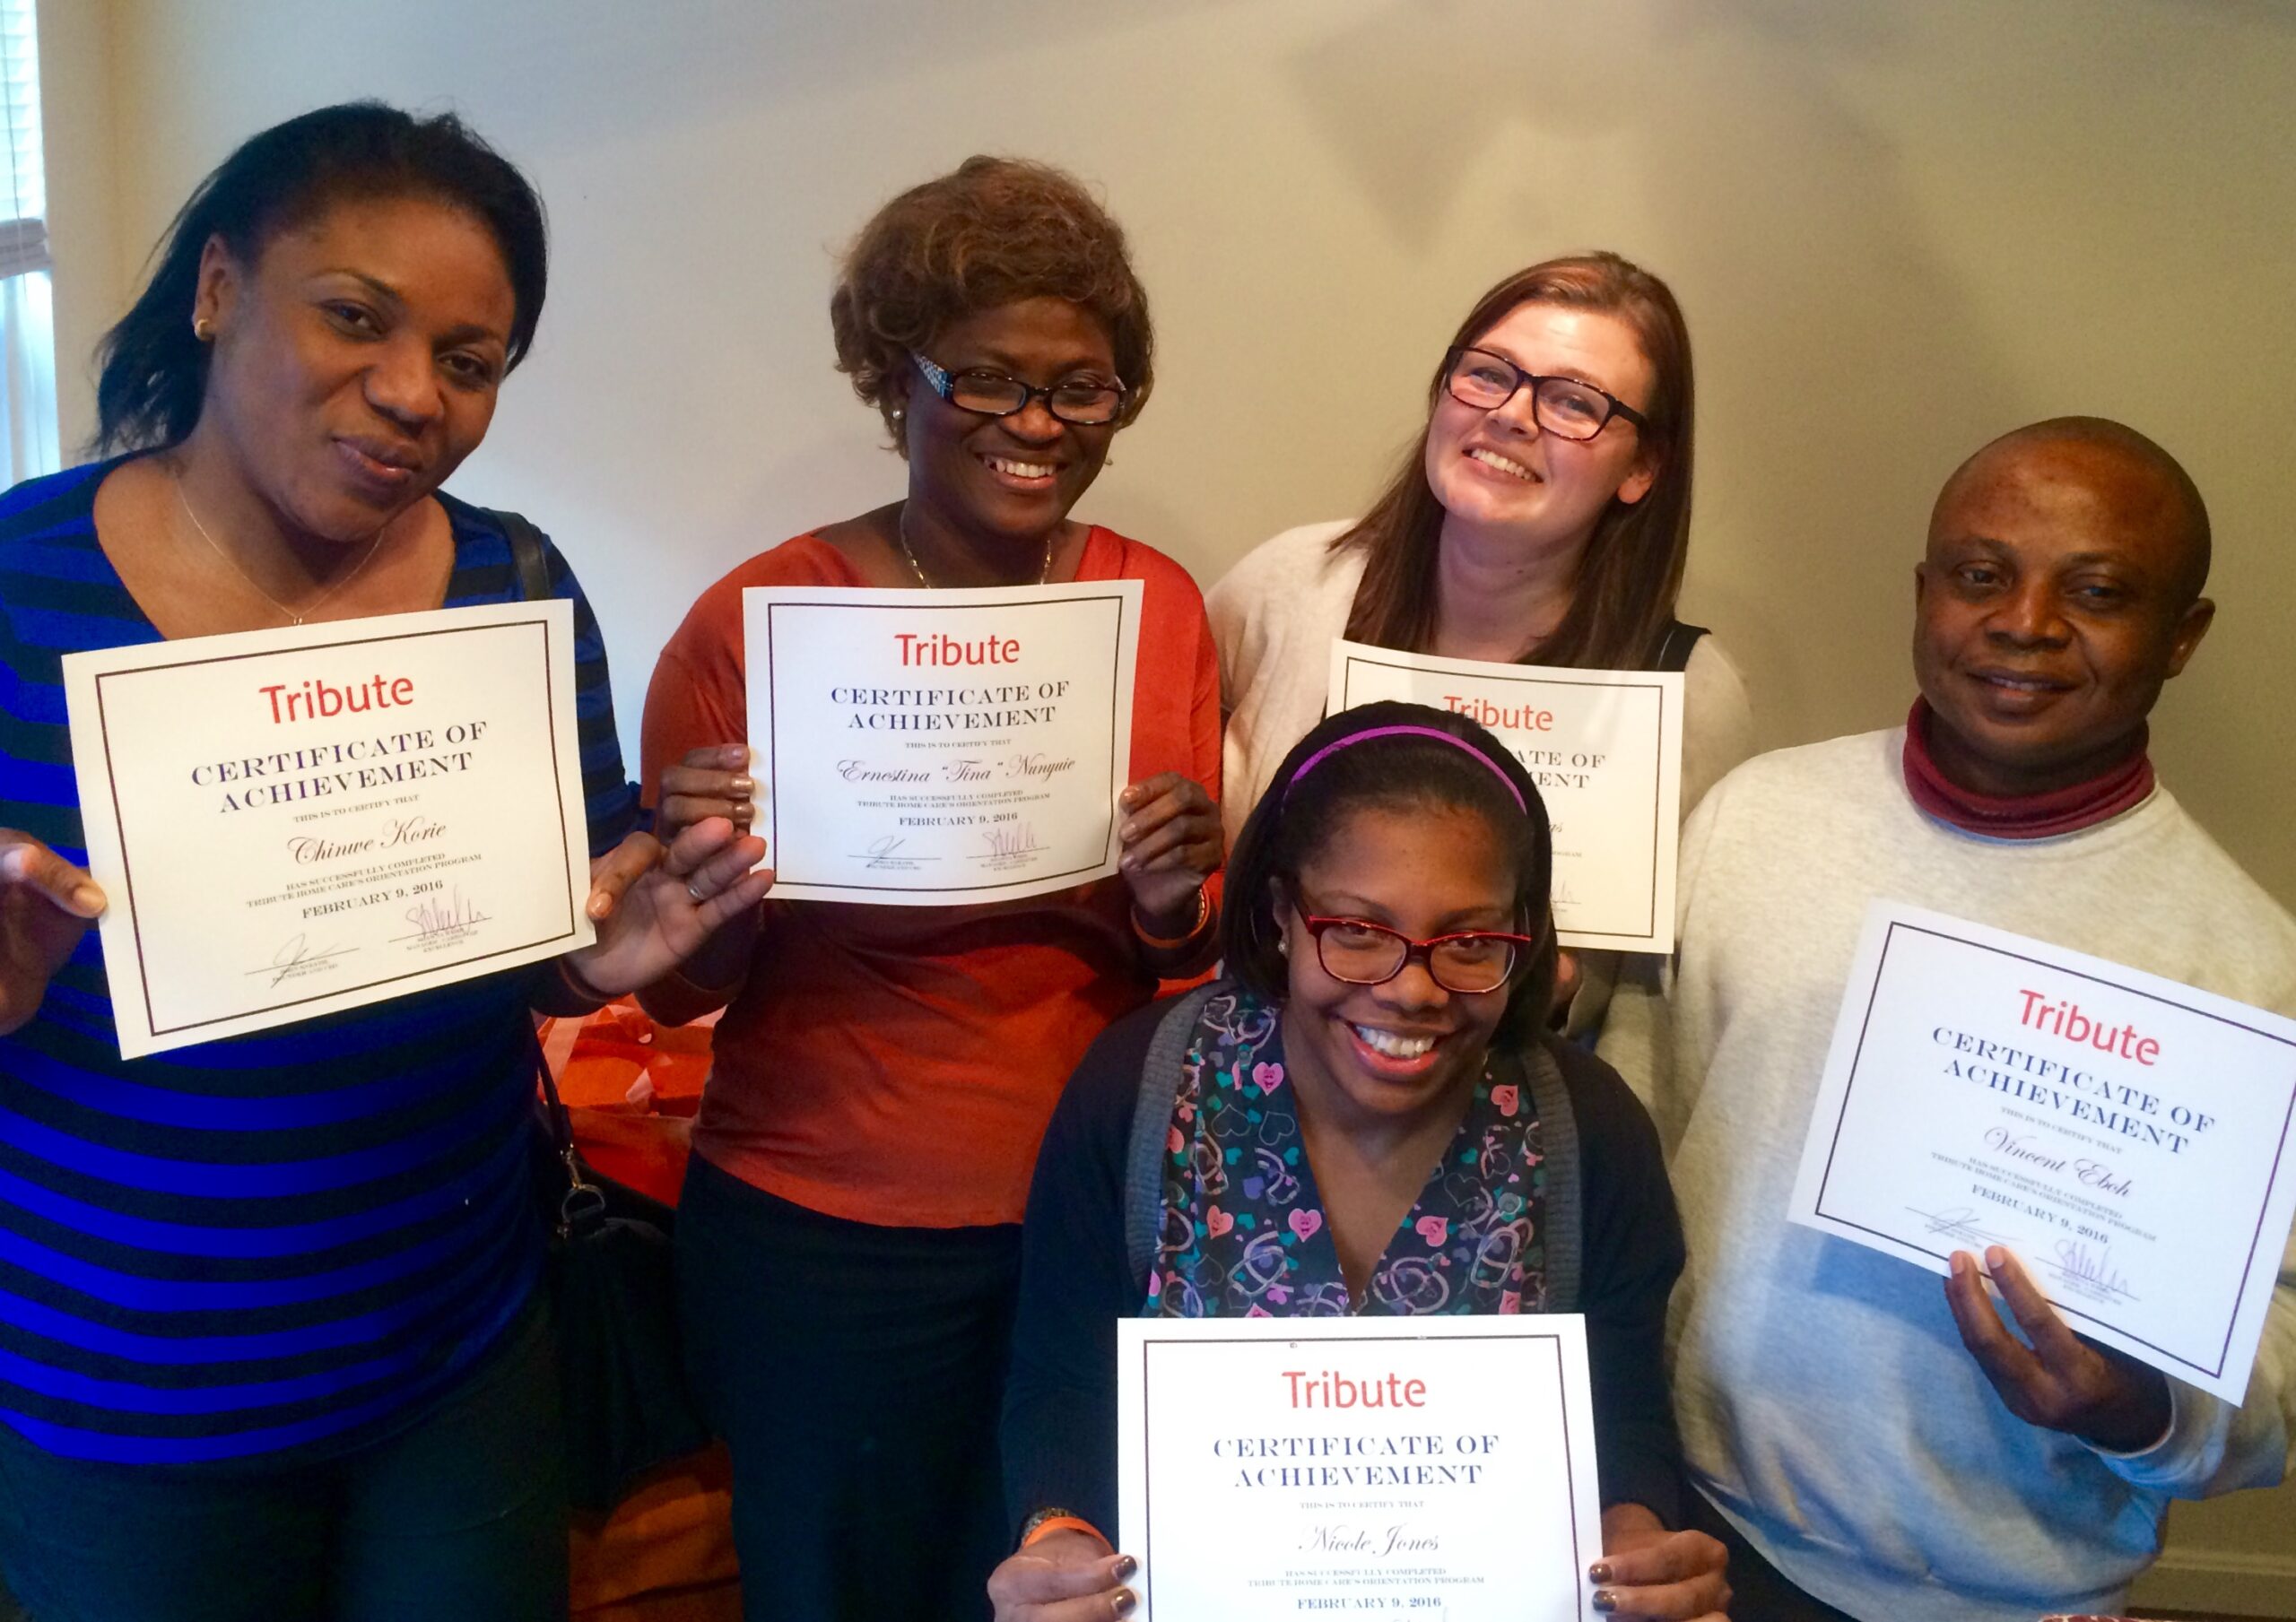 5 Tribute Caregivers smile and celebrate together holding certificates of achievement for completing orientation